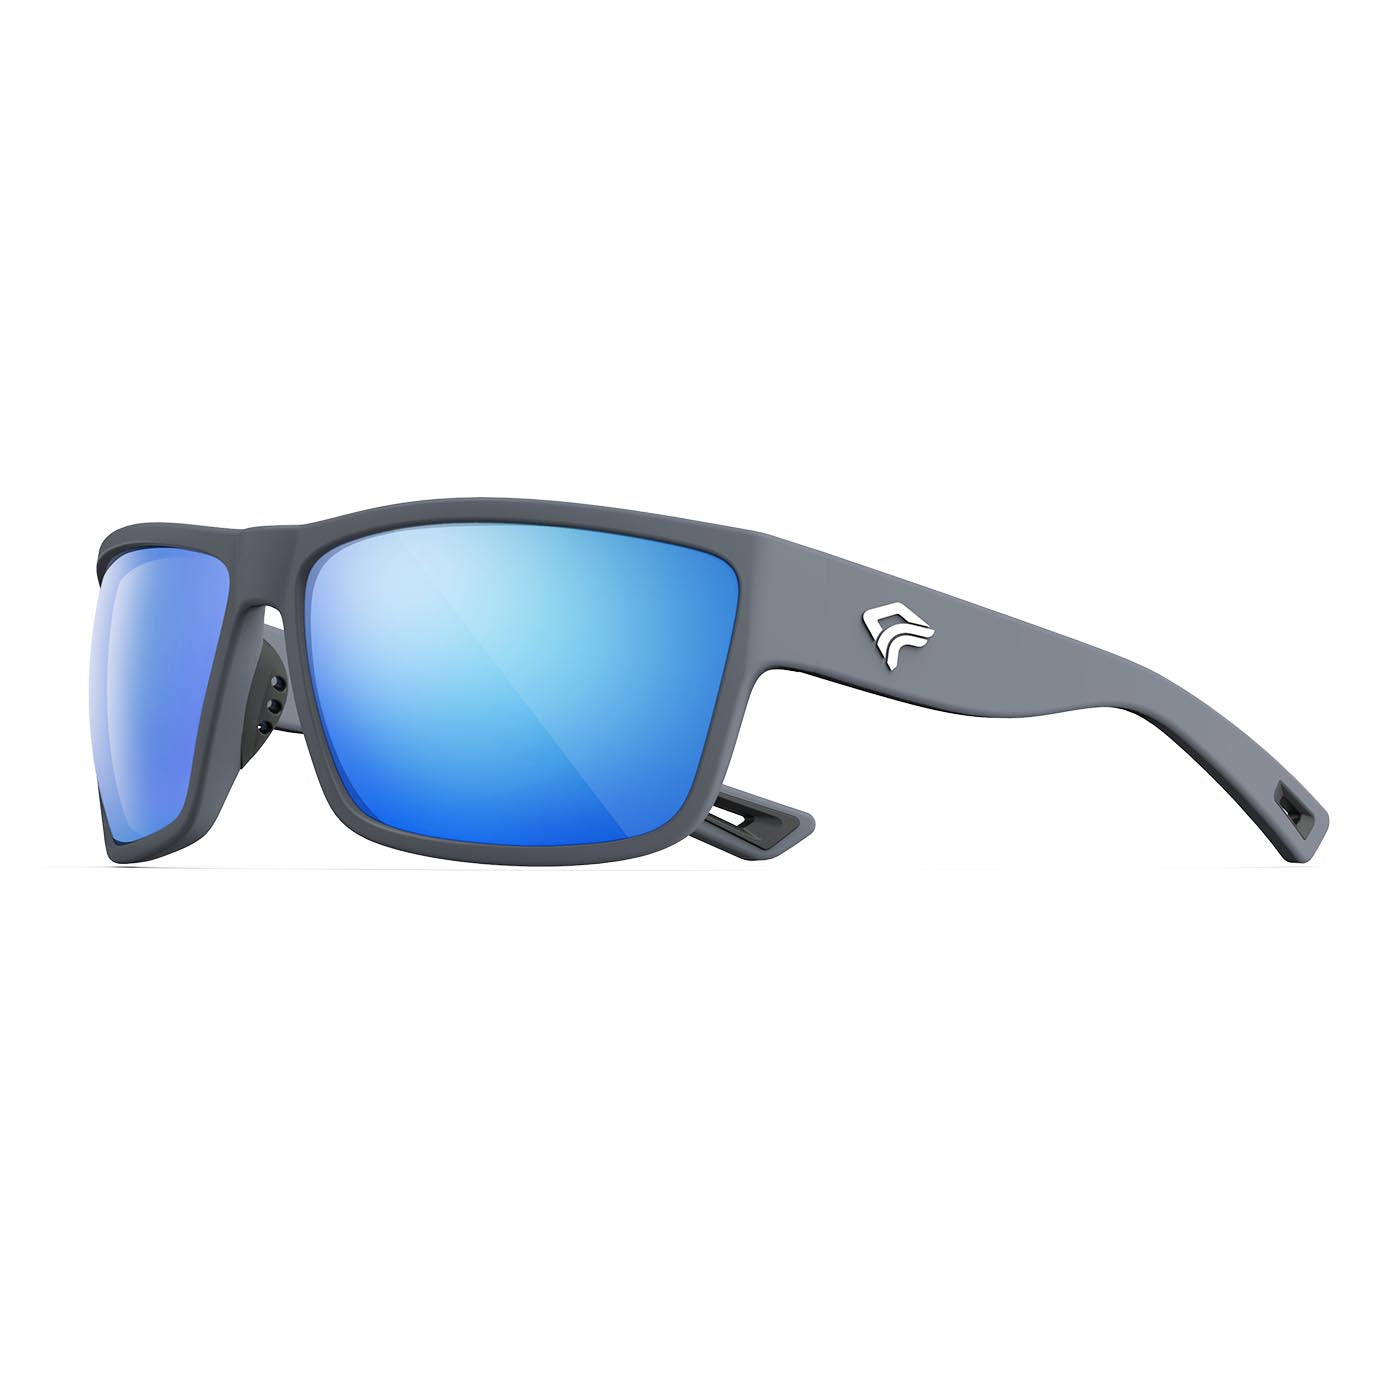 Pure Polarized Sports Sunglasses Frame Matte and Running, Golf, To Ideal Fishing for Grey and - - for Cycling, with Women Transparent Men - Half Adjustable Ideal and Warranty - Lifetime Flexible